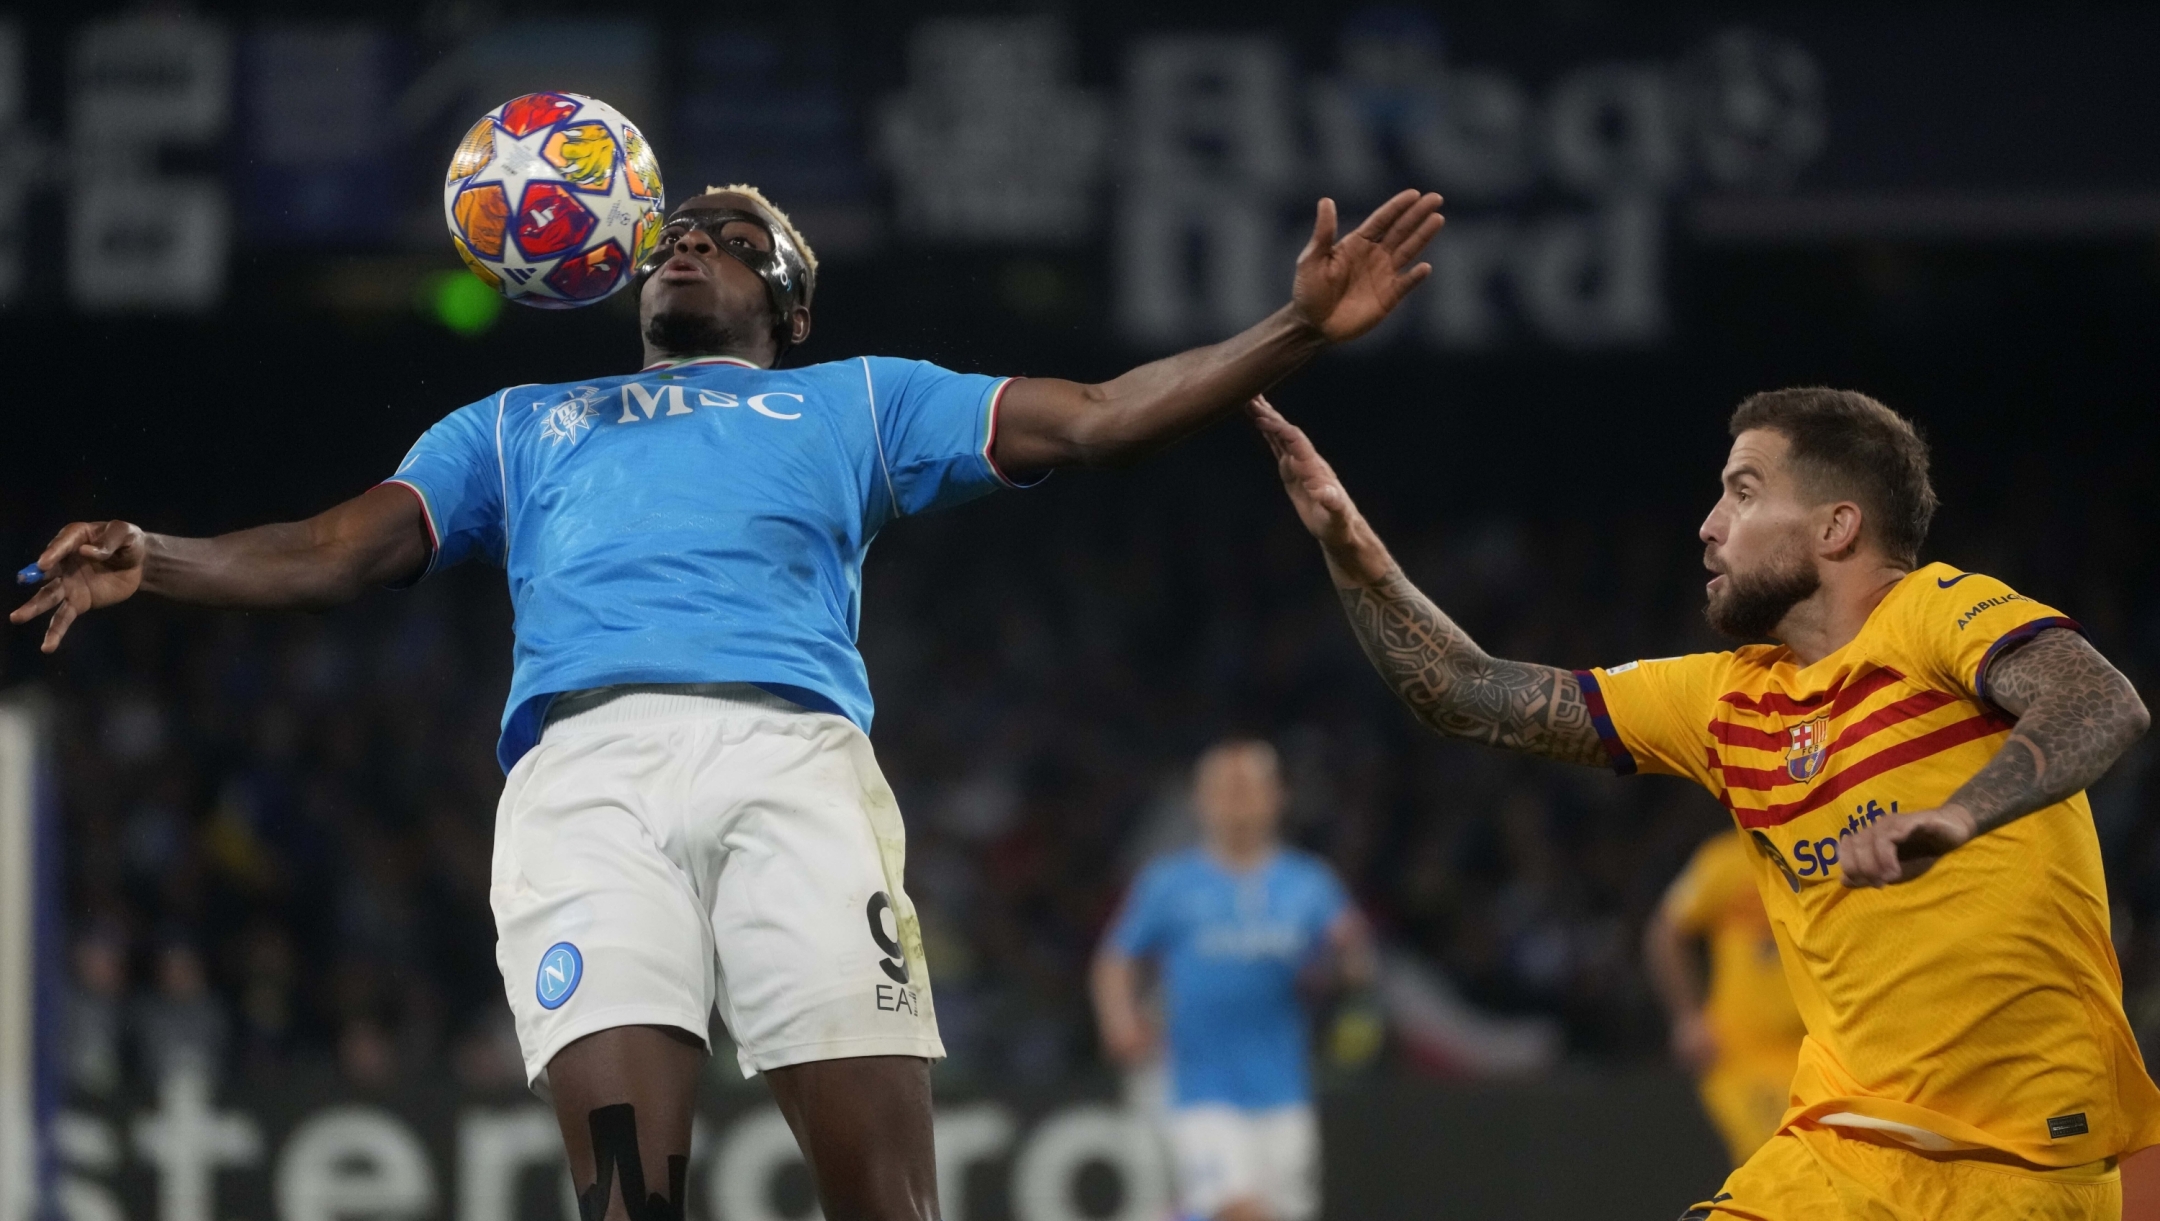 Napoli's Victor Osimhen, left, and Barcelona's Inigo Martinez challenge for the ball during the Champions League, round of 16, first leg soccer match between SSC Napoli and FC Barcelona at the Diego Maradona stadium in Naples, Italy, Wednesday, Feb. 21, 2024. (AP Photo/Gregorio Borgia)